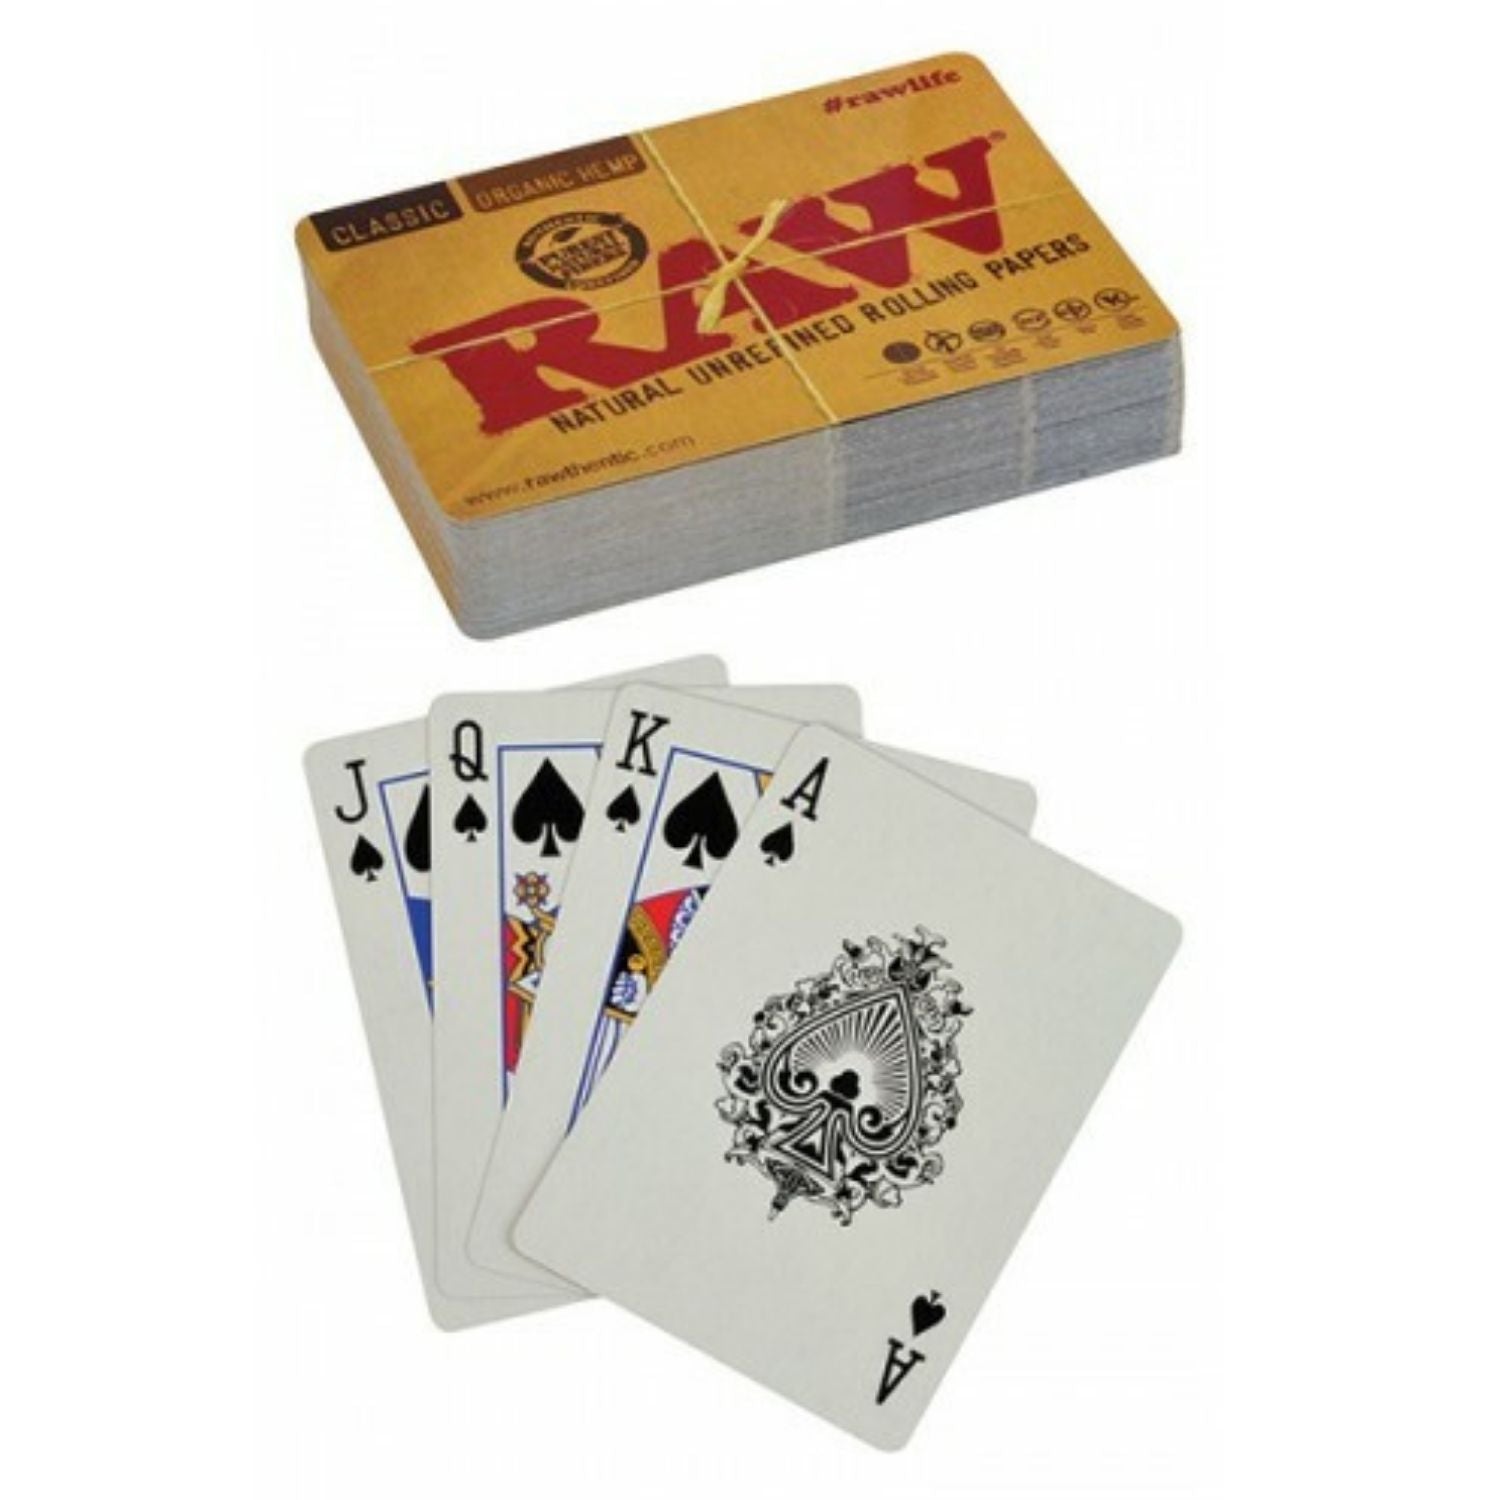 RAW Playing Cards - Brown